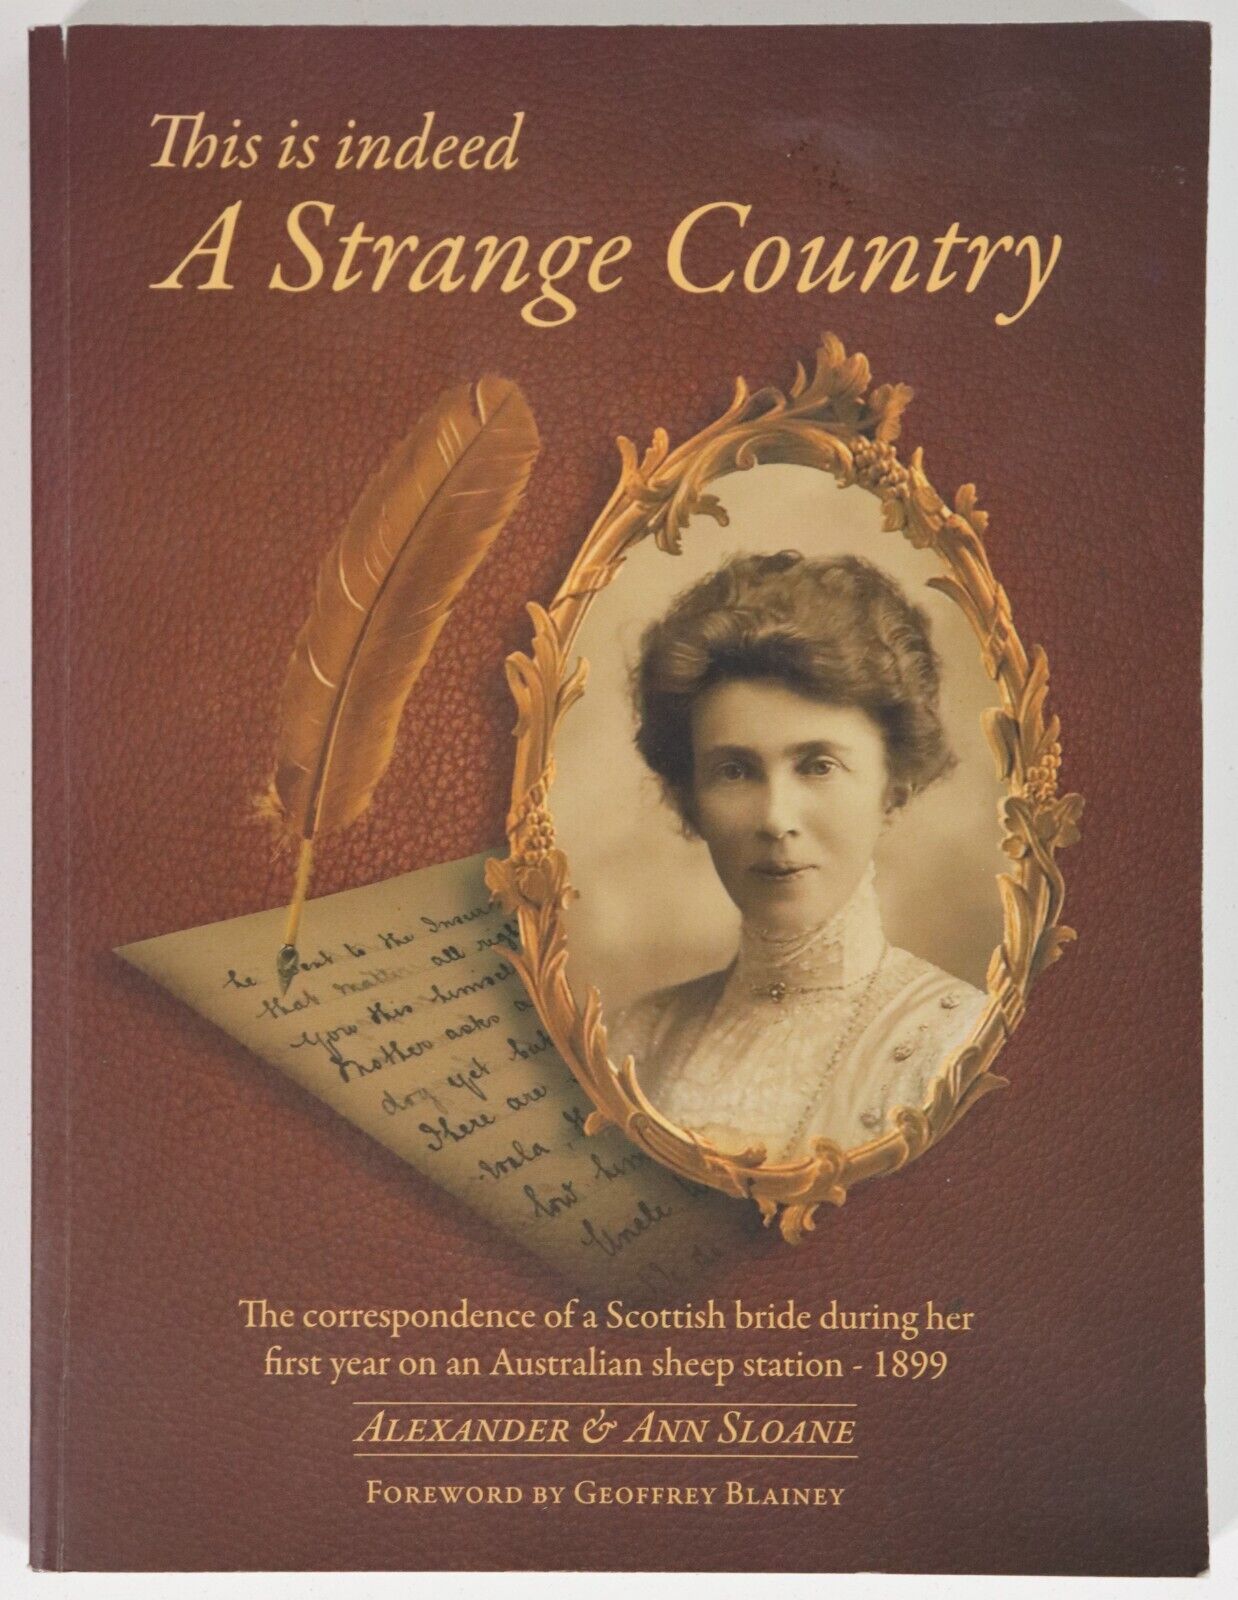 This Is Indeed A Strange Country - 2010 - Australian Colonial History Book